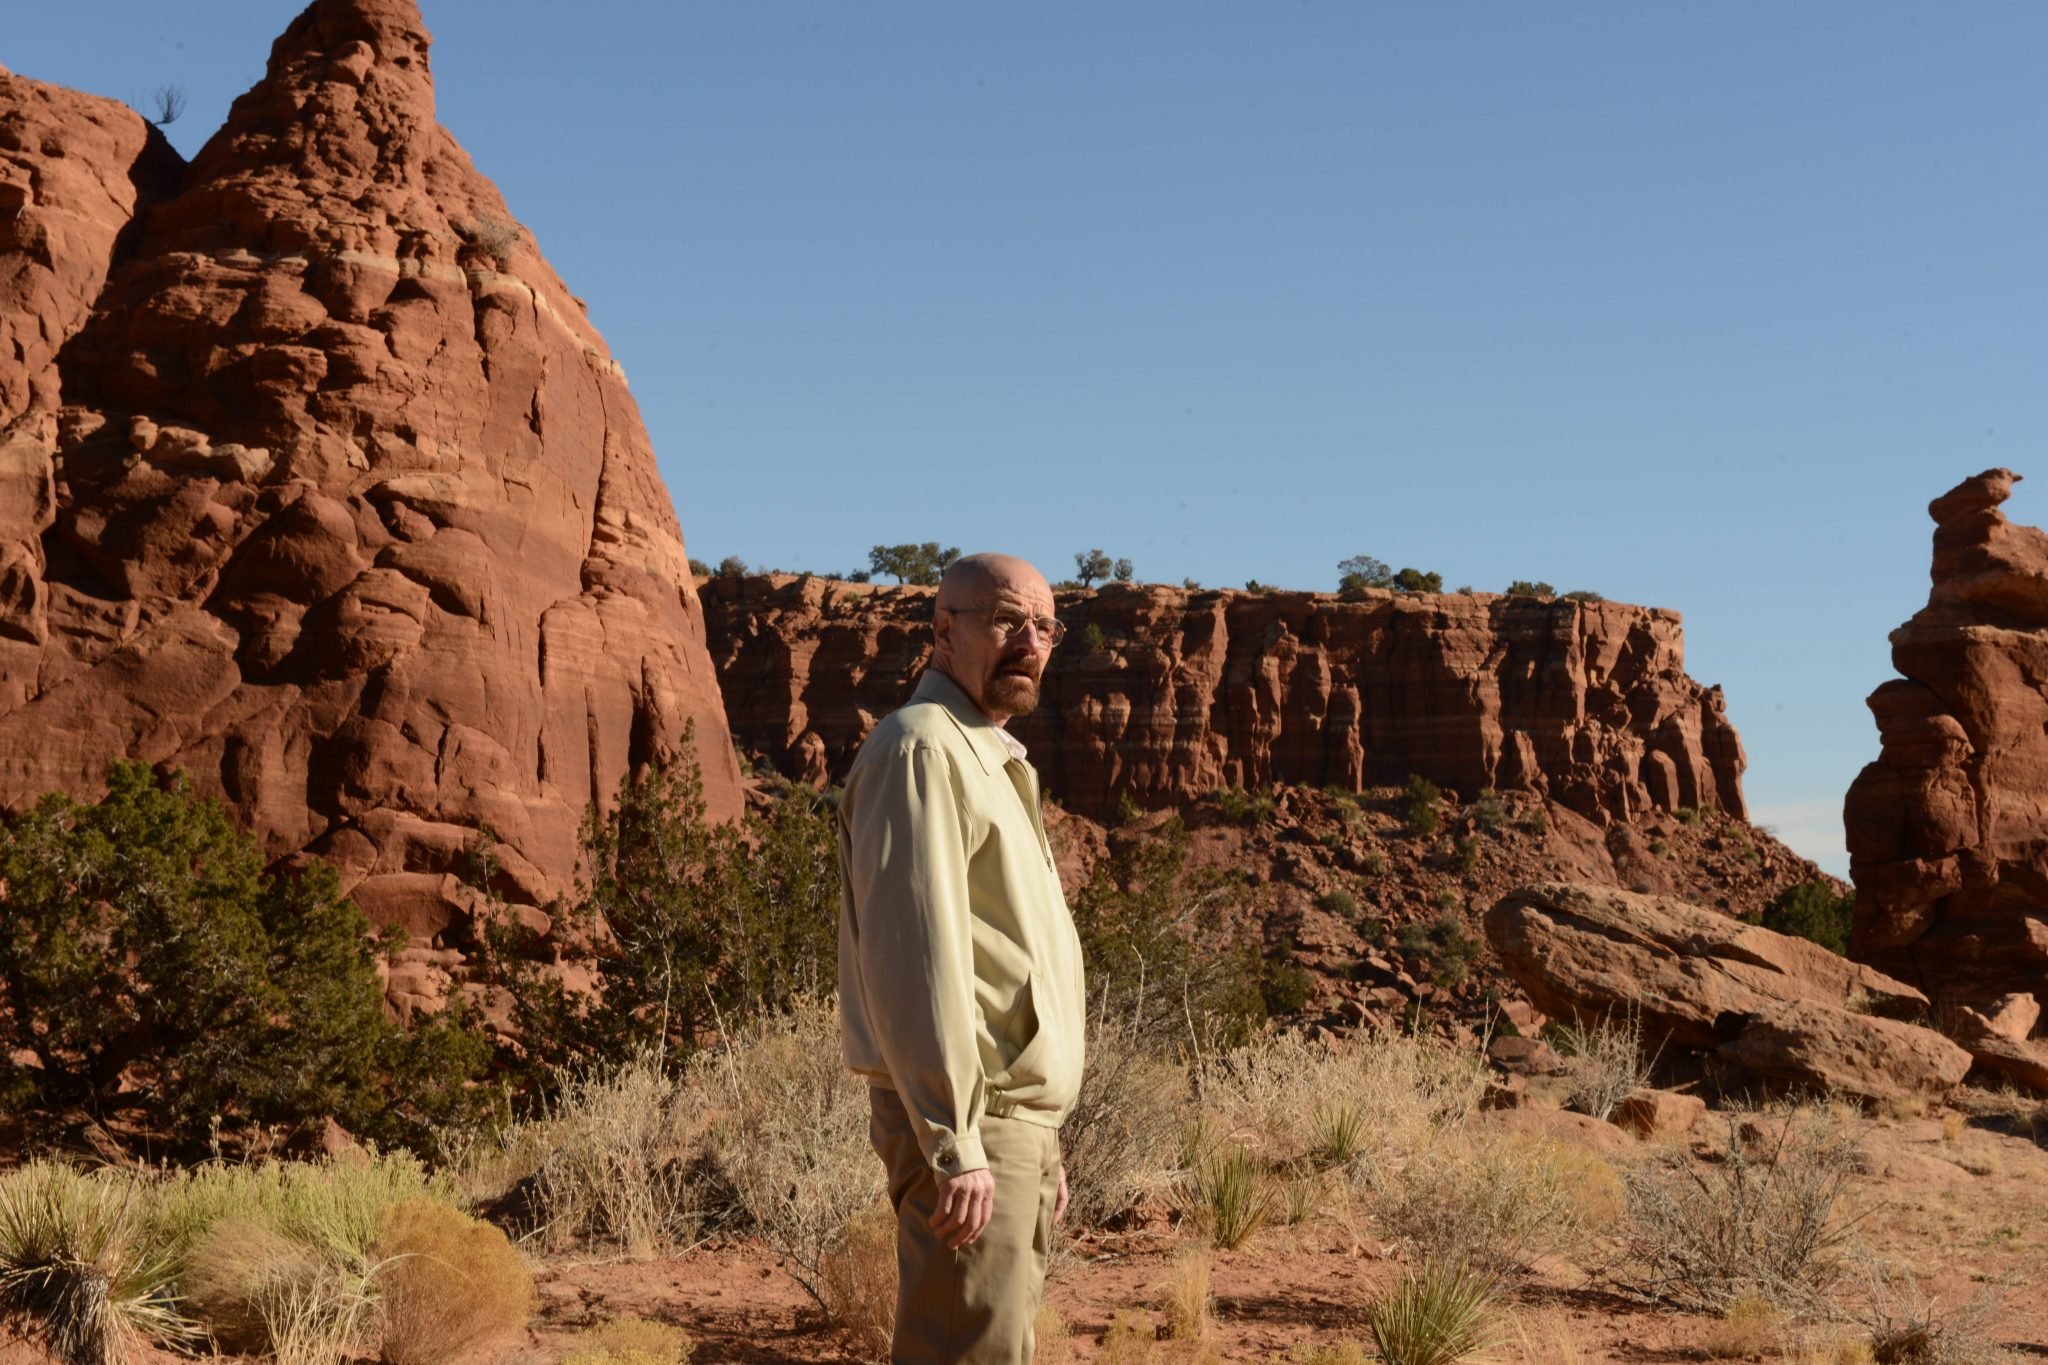 Bryan Cranston stands in the desert looking out.